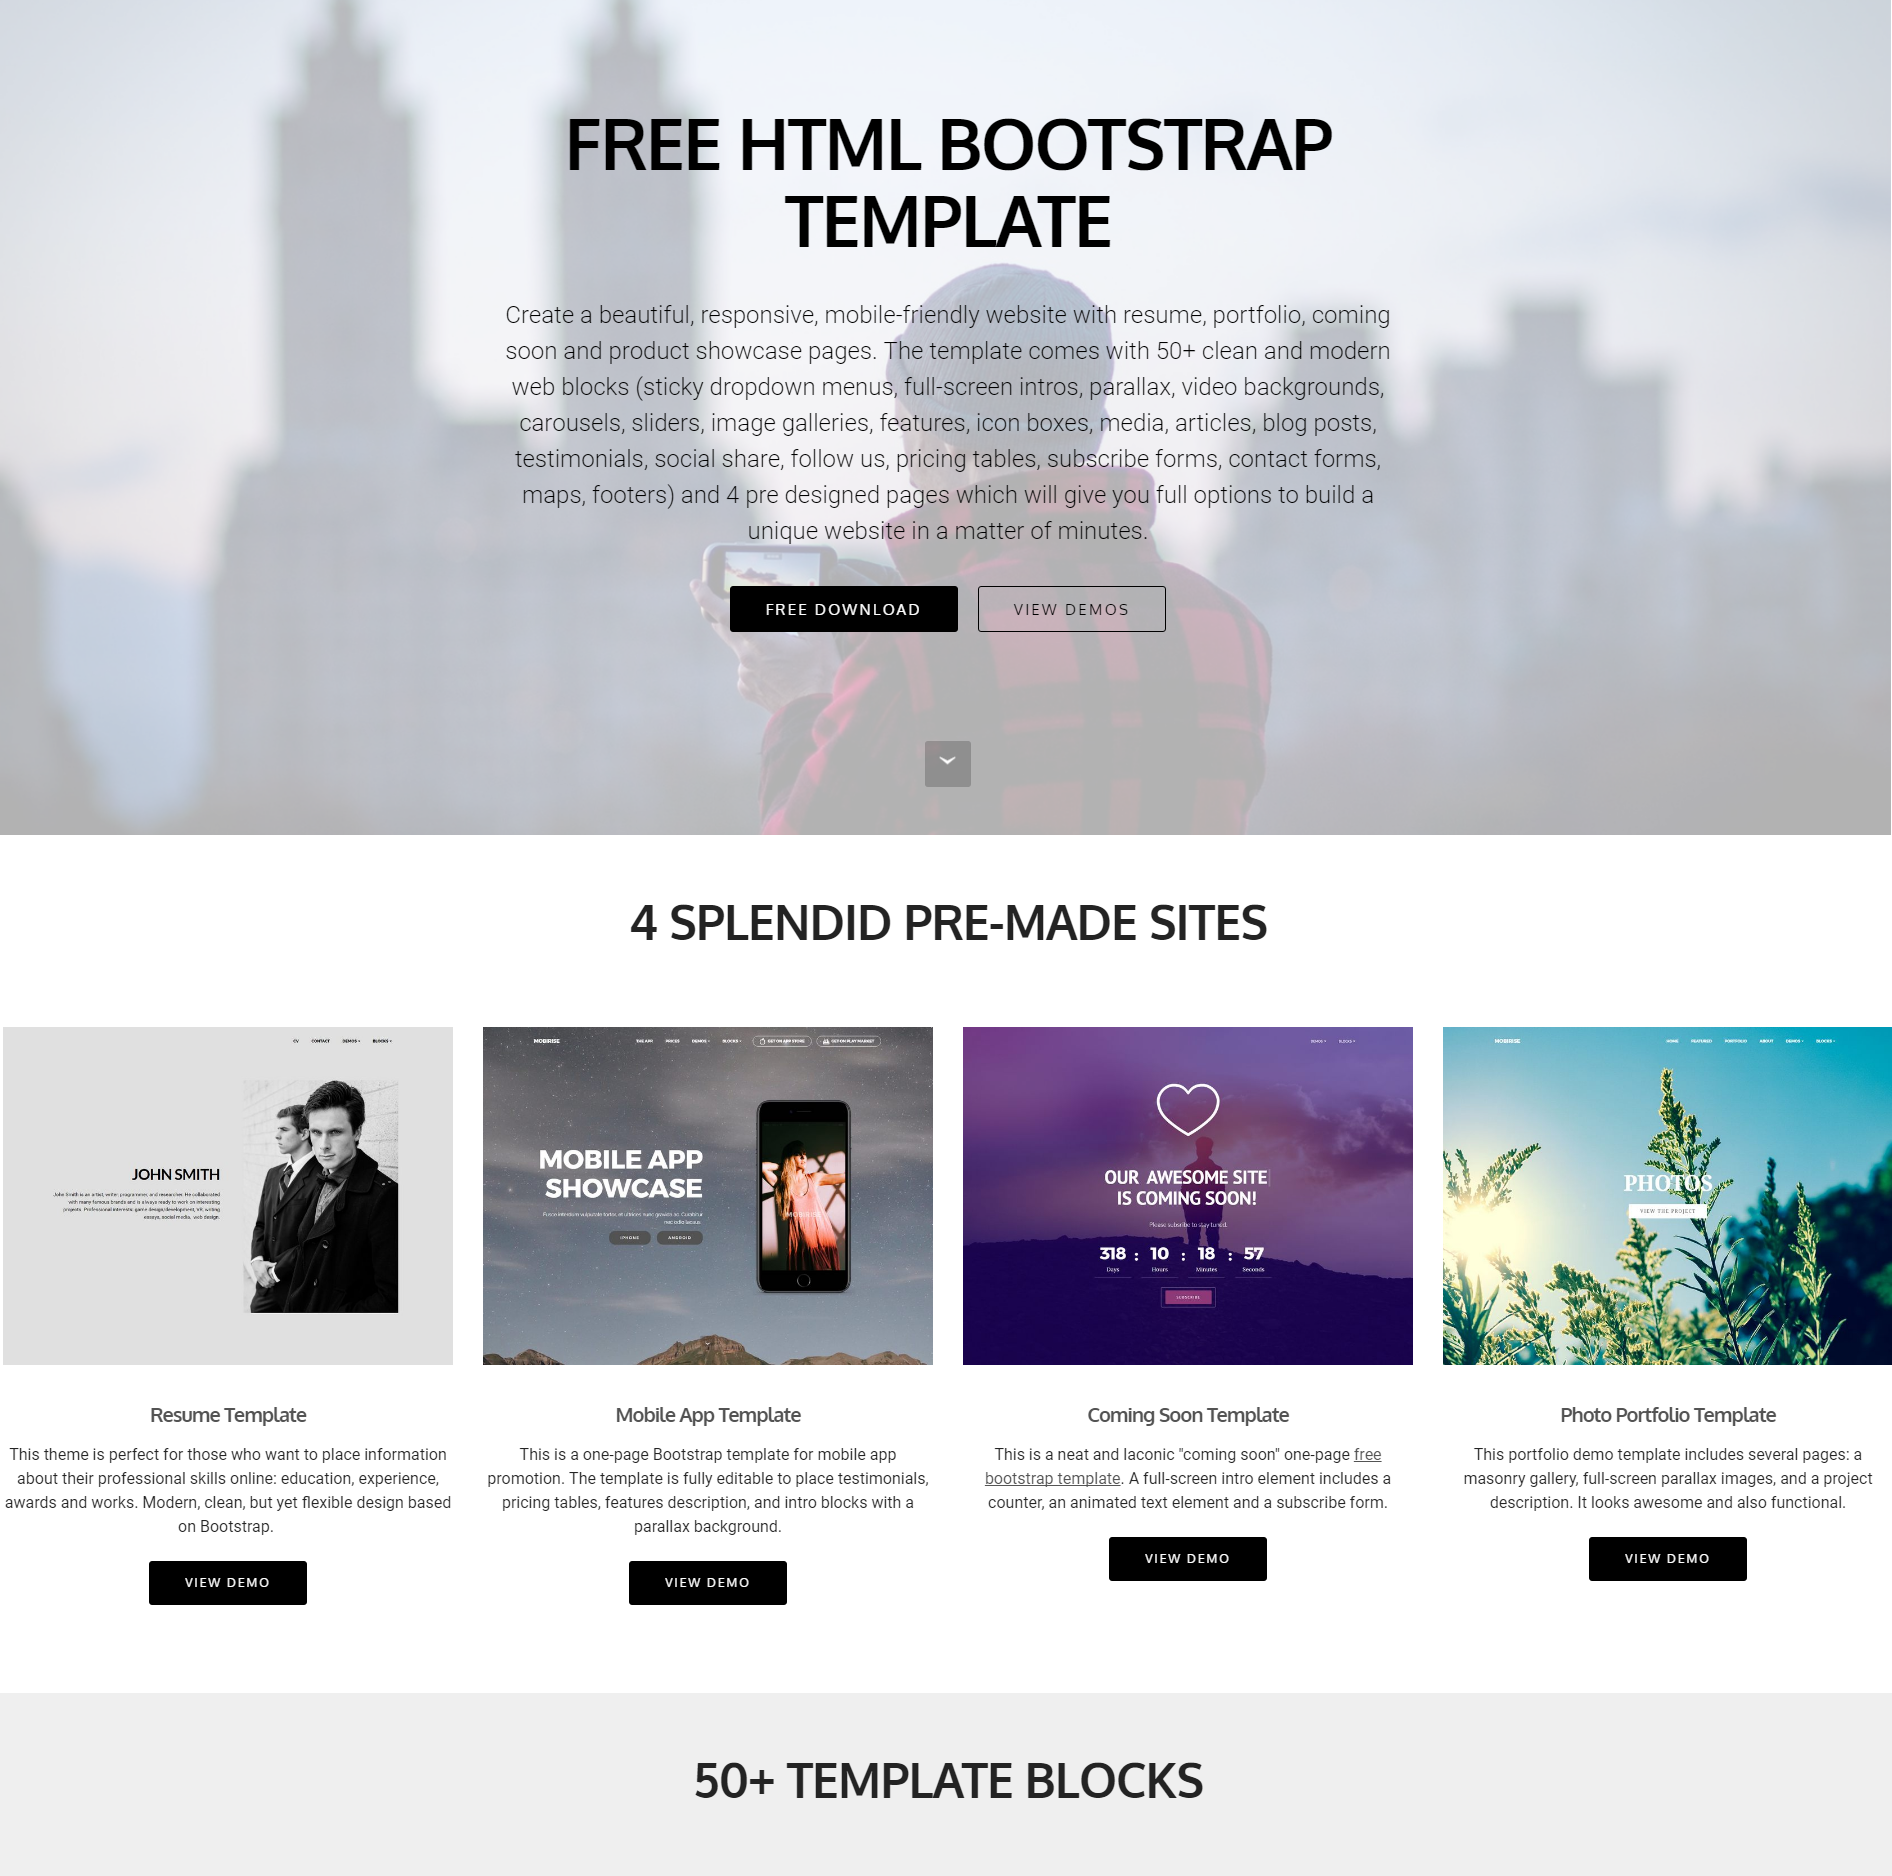 39 brand new free html bootstrap templates 2019